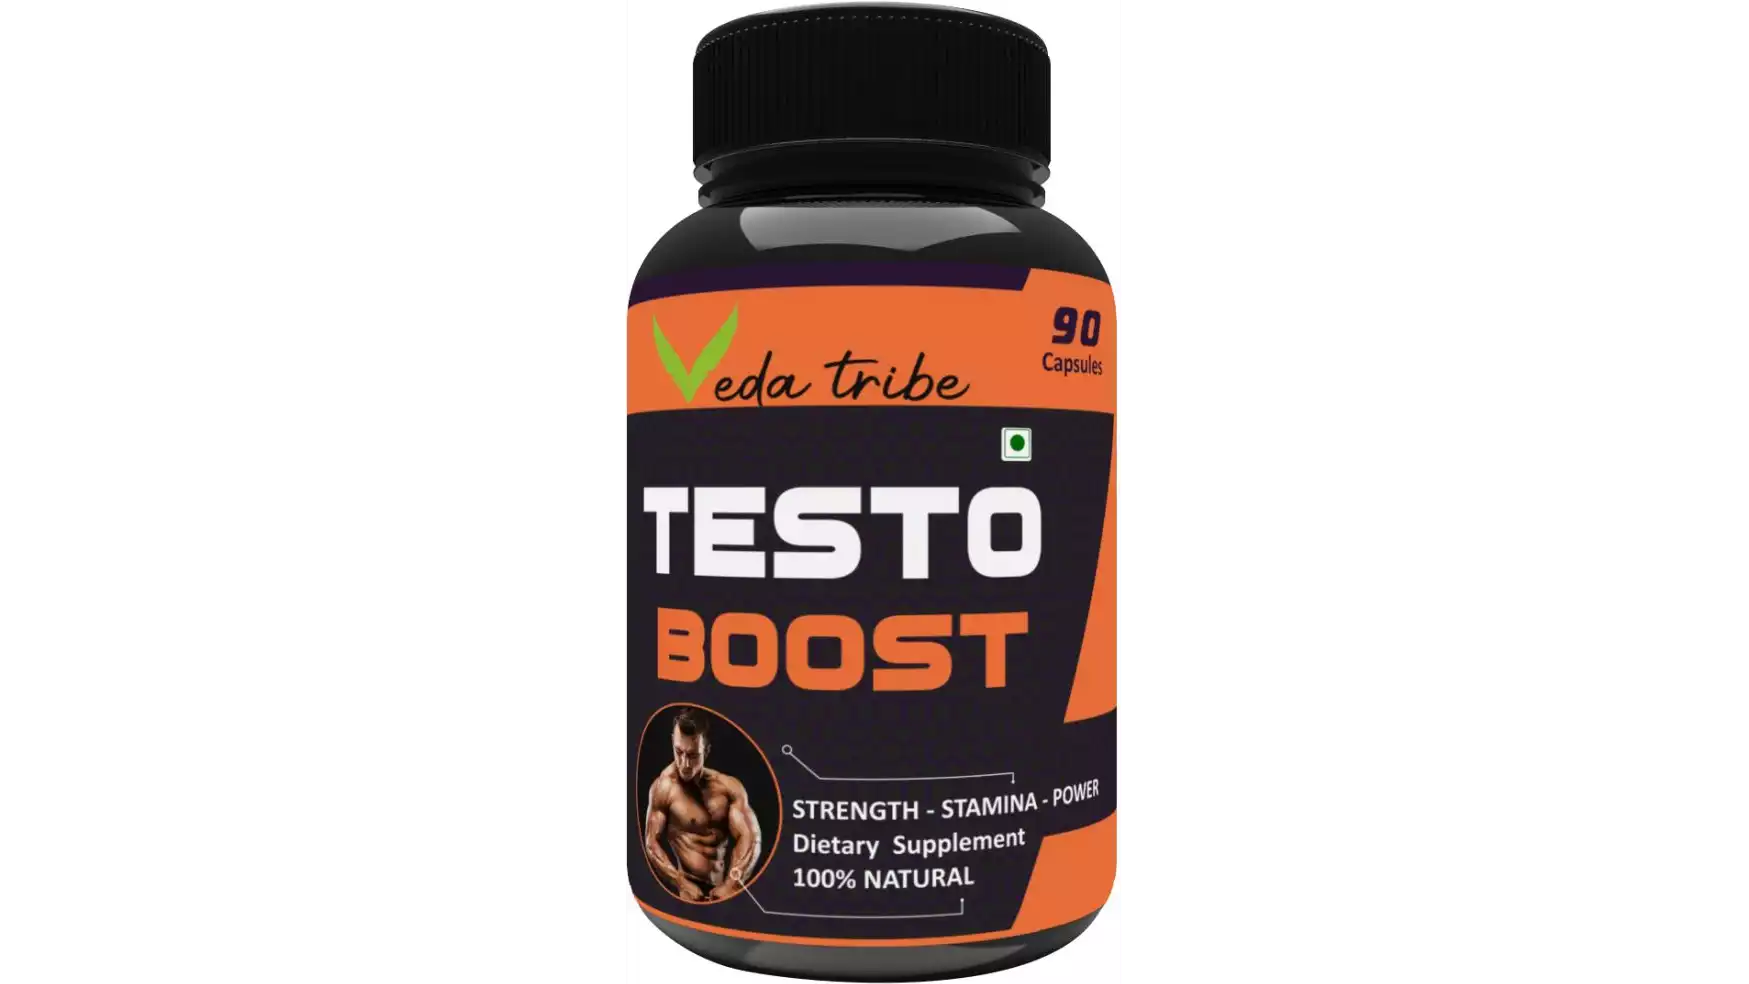 Veda Tribe Testo Boost Supplement (90caps)